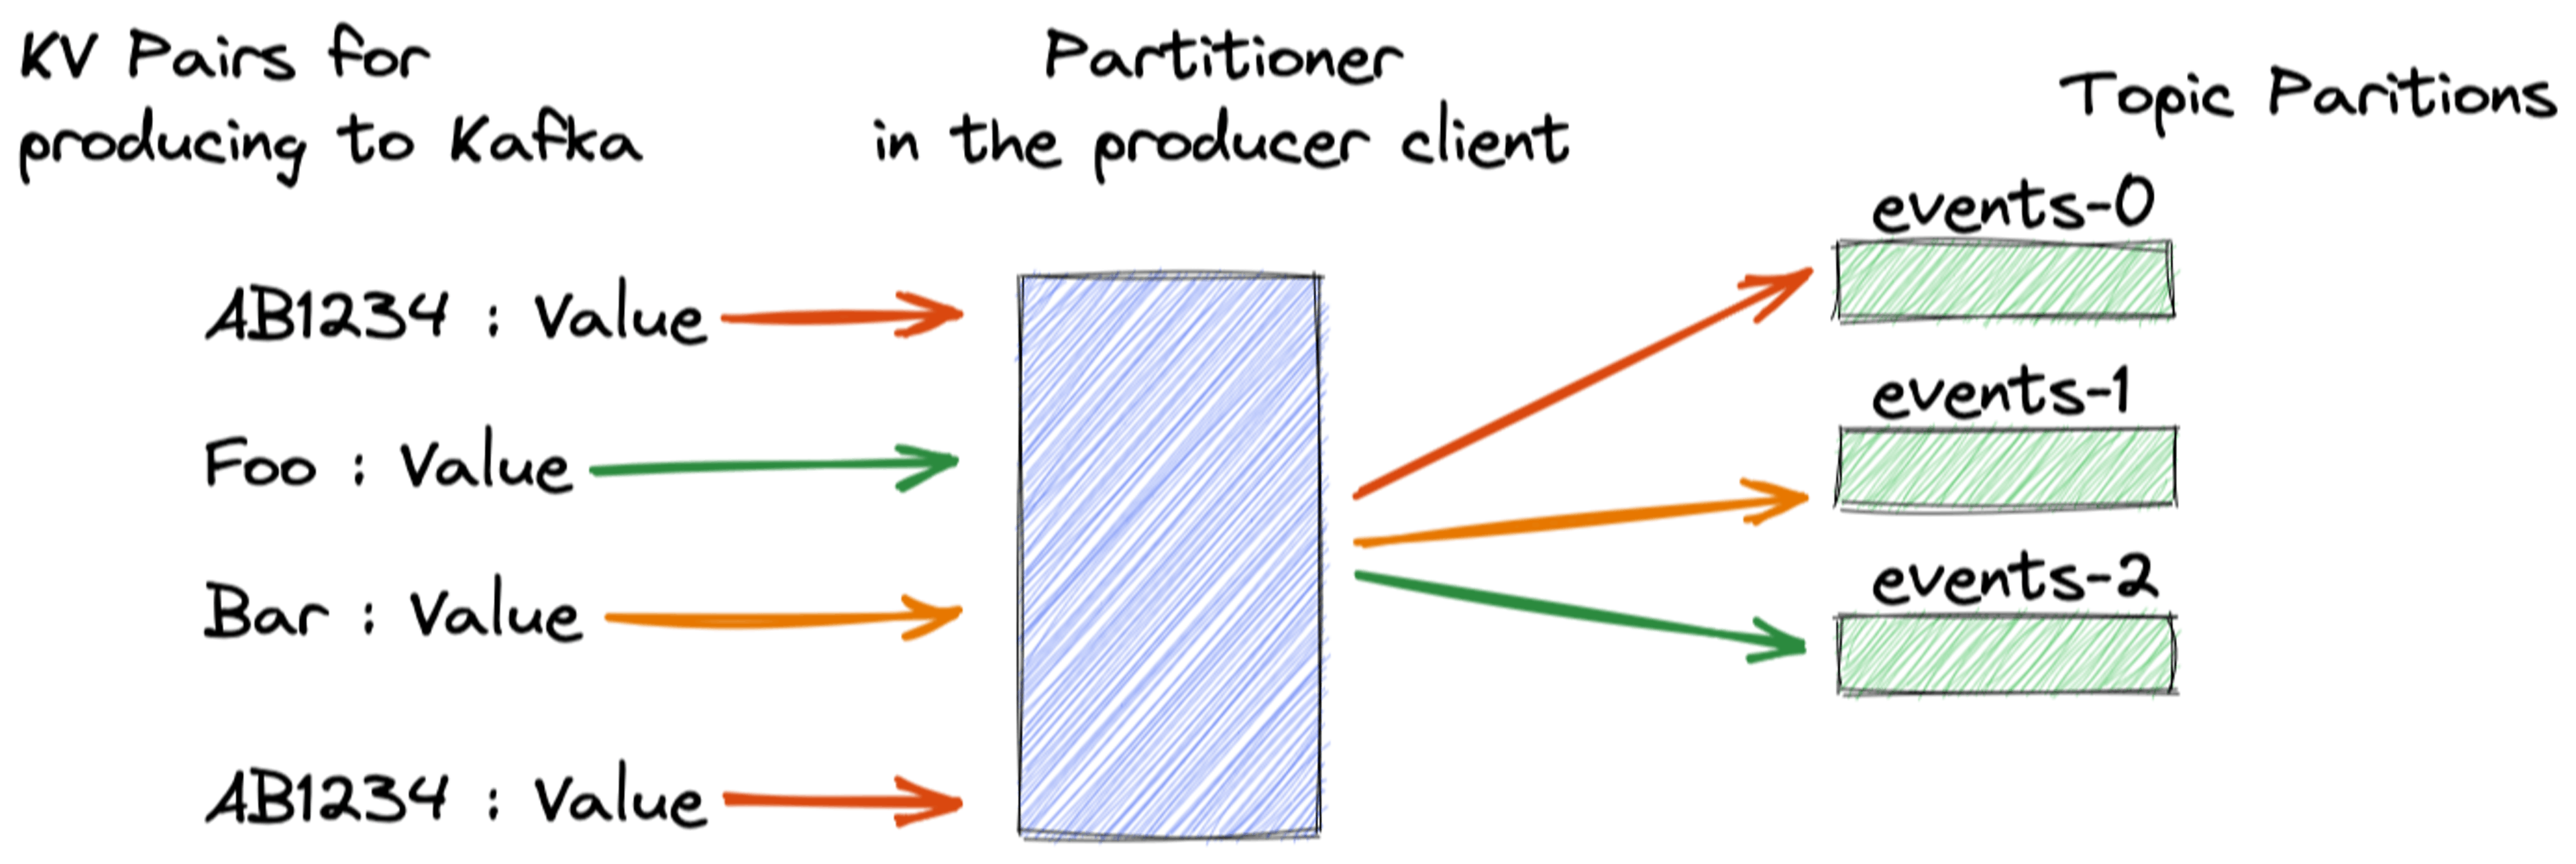 Partitioners use hashing to determine the partition for a key